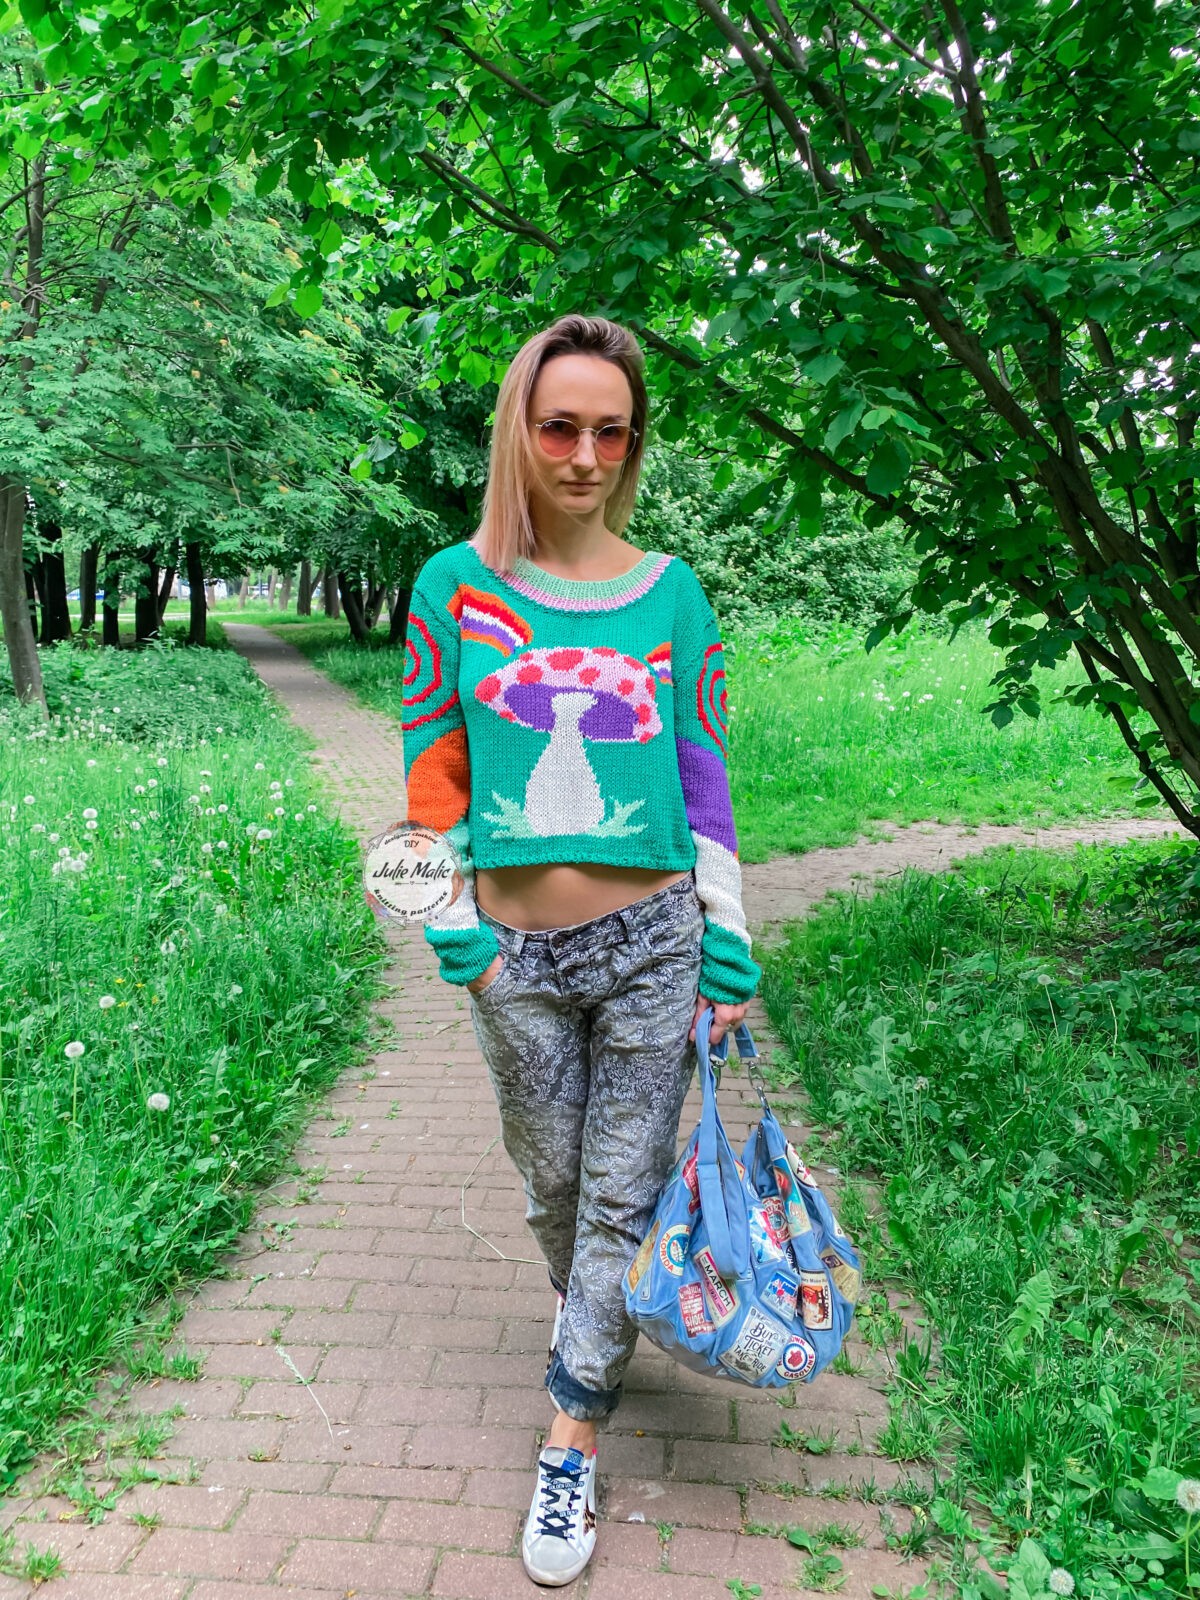 hippie style sweater knitting pattern, printed sweater knitting pattern, green sweater, colorful sweater, mushroom sweater, hippie soul jumper knit pattern, women’s hippie art pullover knitting pattern, cropped silhouette, slim fit jumper step by step tutorial, multicolor rainbow pullover free knitting pattern, unique crop sweater pattern, hand knitted summer jumper, hand knitting blog, fashion knitwear patterns, spring pullover crochet pattern, fall sweater buy knitting pattern, sweater for women, autumn pullover for womens, mushroom print sweater pattern free, colorful knitwear fashion, spring outfit ideas, fall womens outfit, women’s chunky knit sweater, round neck pullover, girls summer clothing, womens crew neck sweater knit pattern, scoop neckline jumper knitting chart, knitwear designer, fall clothes patterns buy online, Julie Malic design shop, knitting patterns for beginners, fashion style clothing, street style pullover, knitting inspiration, knitting ideas, patterns by julia malic, simply knitting pattern, abstract sweater easy knitting pattern, mushroom fungi jumper, mushroom knitting chart, gift ideas for her, handmade ideas, hand made clothing, diy clothing, diy gift ideas, winter sweater for ladies knitting patterns, short front long back sweater knitting pattern free, women’s extra long sleeves jumper knit pattern, cozy cotton sweater knitting ideas, toadstool colorwork sweater, geometric color work jumper, cute mushroom print pullover, magical mushroom sweater for women, hippie magic mushroom painting sweater for ladies, women’s take a trip pullover knitting pattern, psychedelic knit pullover, trippy mushroom art knitting pattern, hippie peace mushroom clothing, cartoon hippie mushroom sweater for women knitting pattern, bohemian hippie mushroom jumper, Coachella outfit ideas, stay trippy little hippie, moongirl clothing, moonchild sweater, rainbow mushroom printed pullover knit chart, green forest magic mushroom sweater knitting pattern